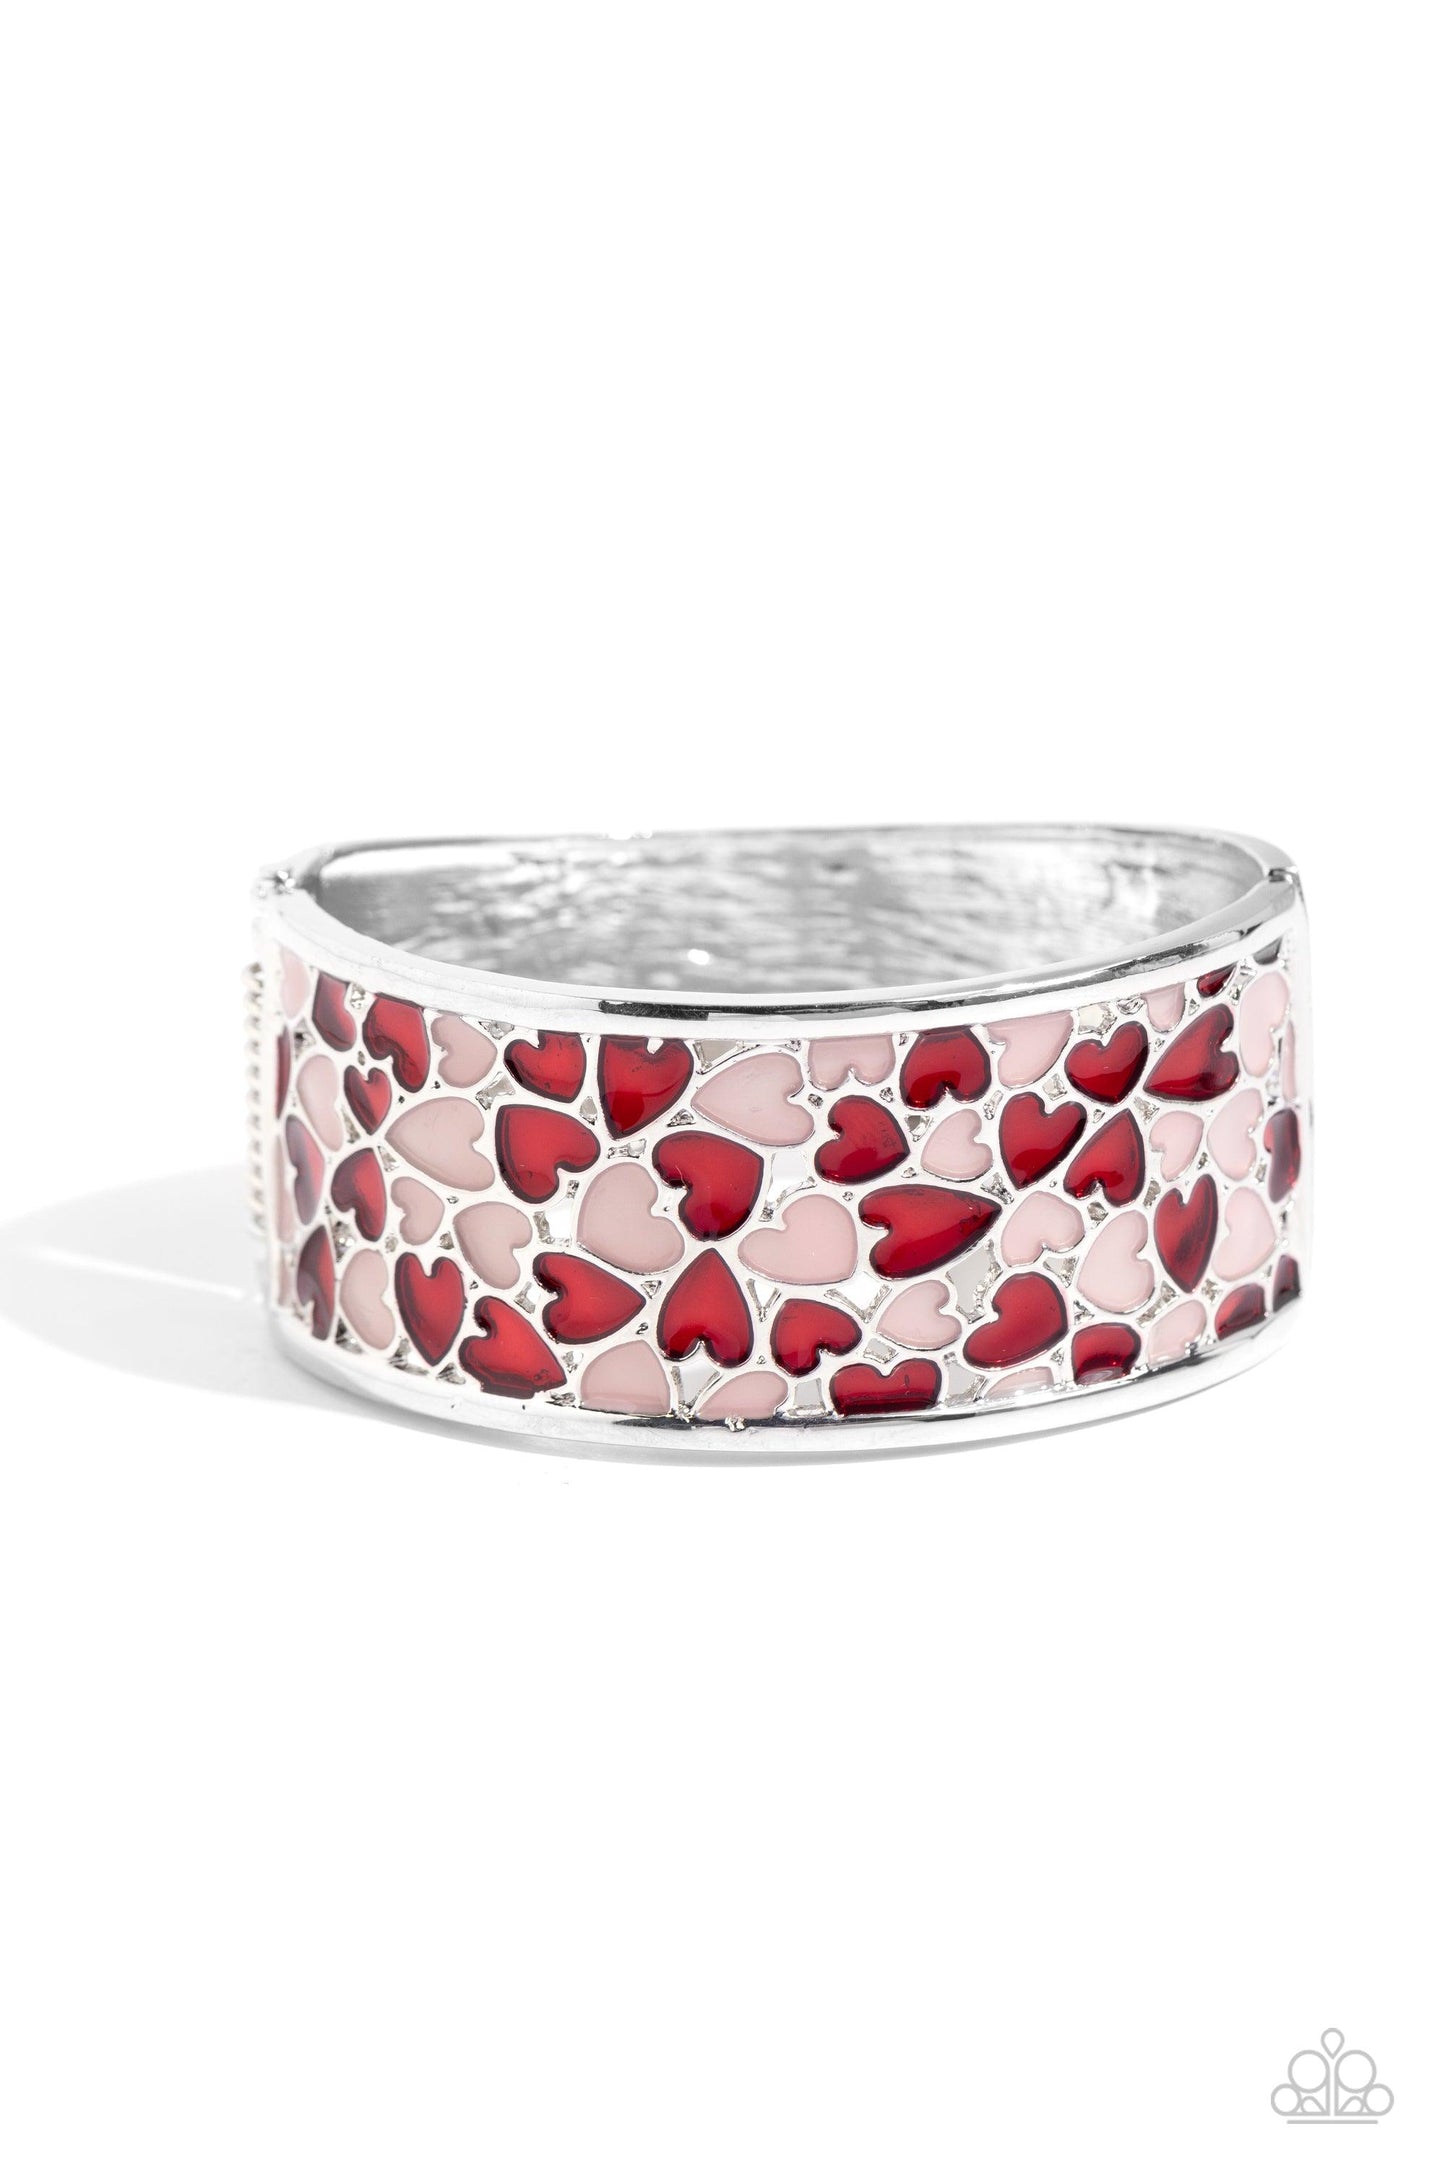 Paparazzi Accessories - Penchant for Patterns - Red Bracelet - Bling by JessieK